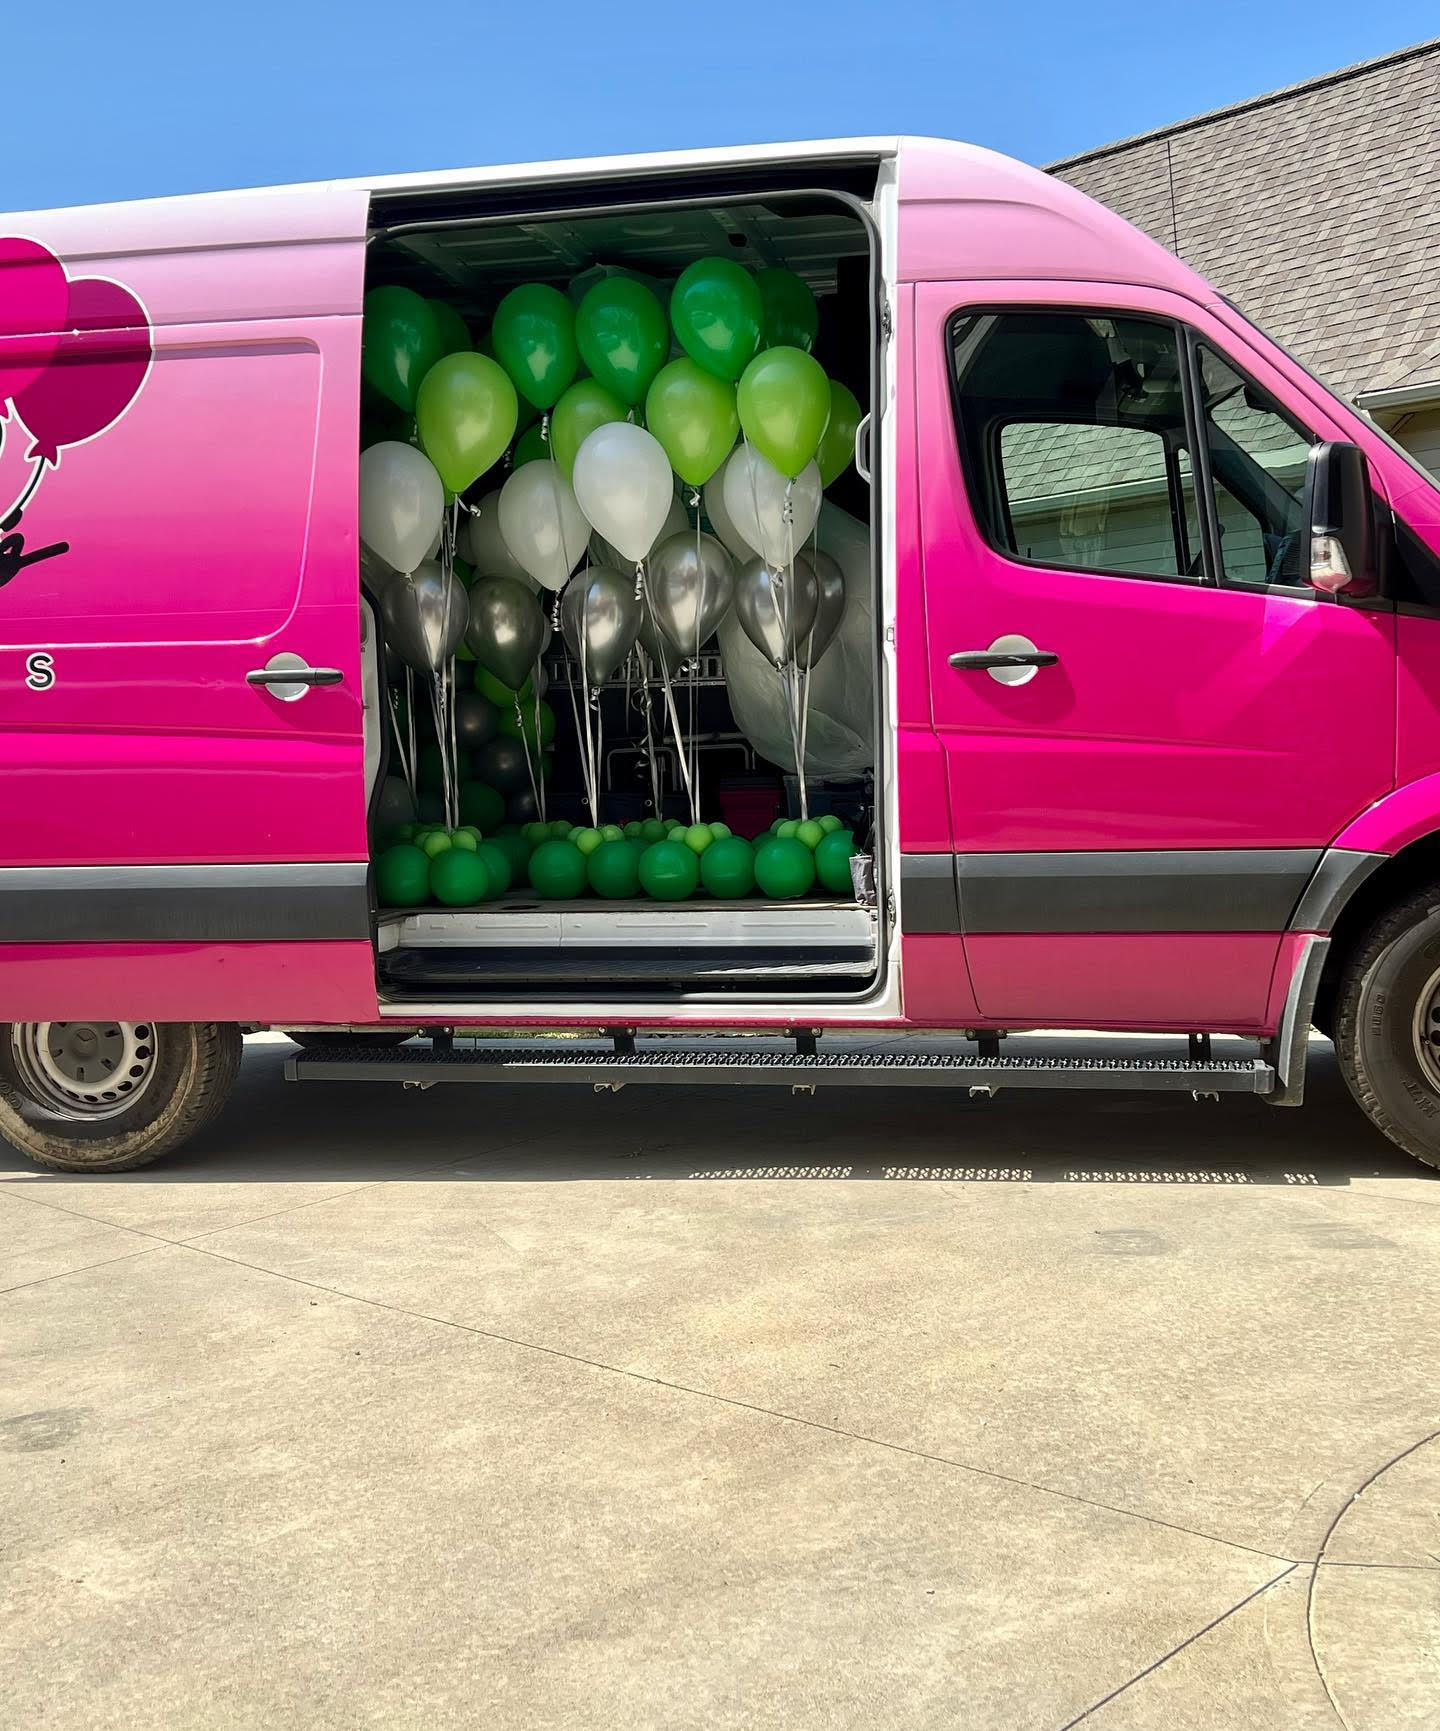 Van loaded with balloons